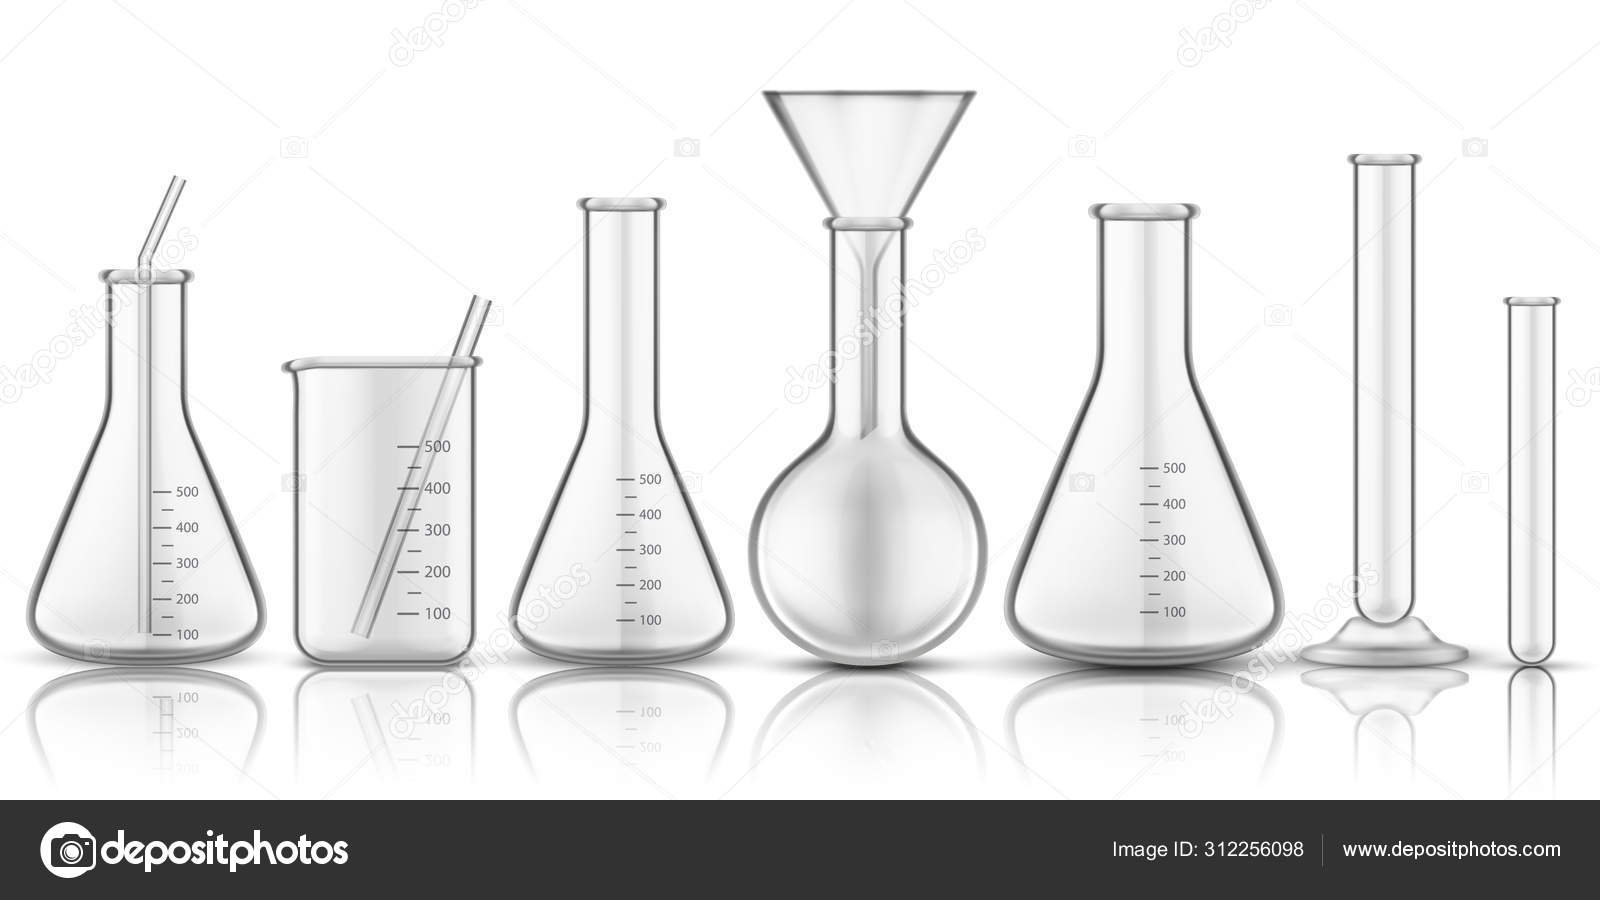 Beaker, chemistry, container, containers, education, glass, liquid